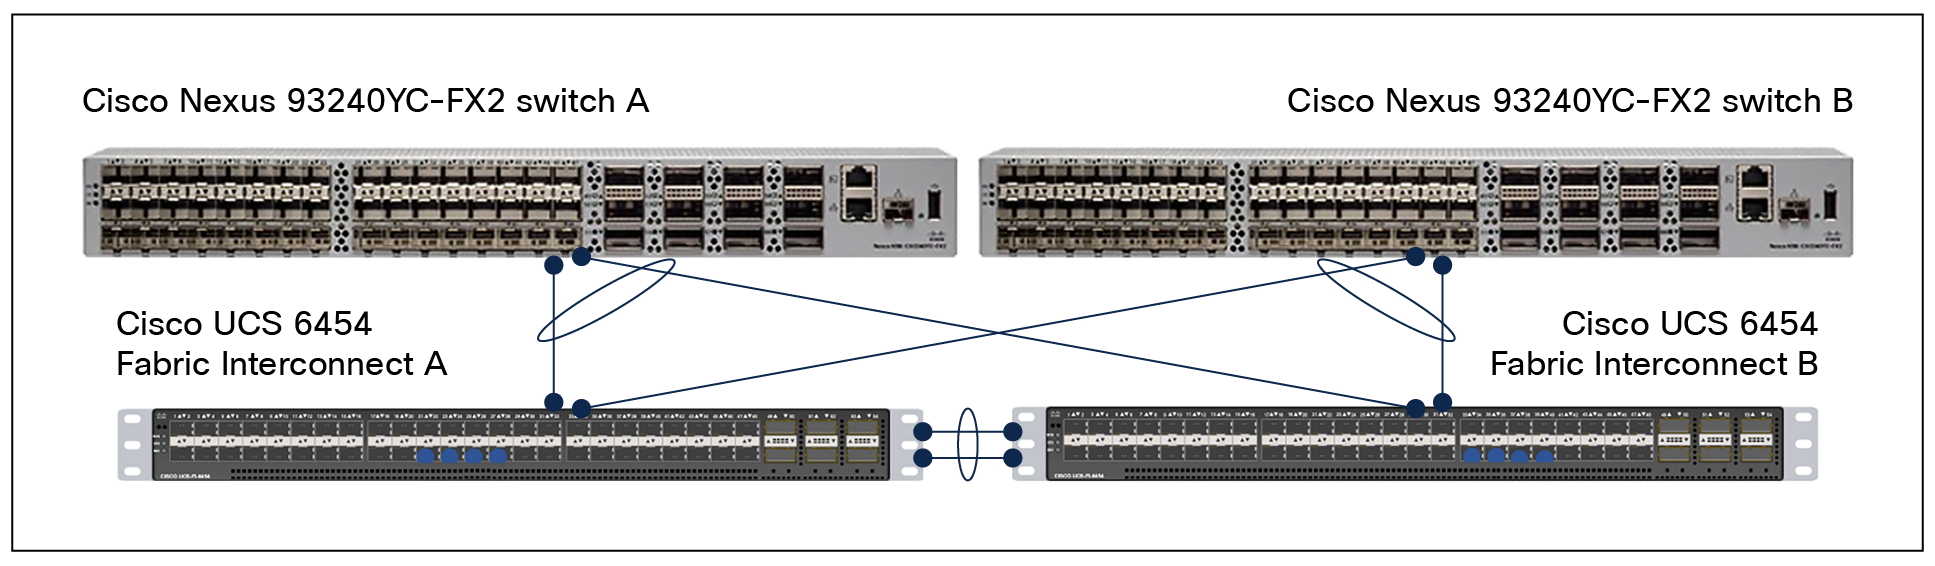 Connectivity of Cisco Nexus 9000 Series Switches with Cisco UCS 6454 Fabric Interconnects